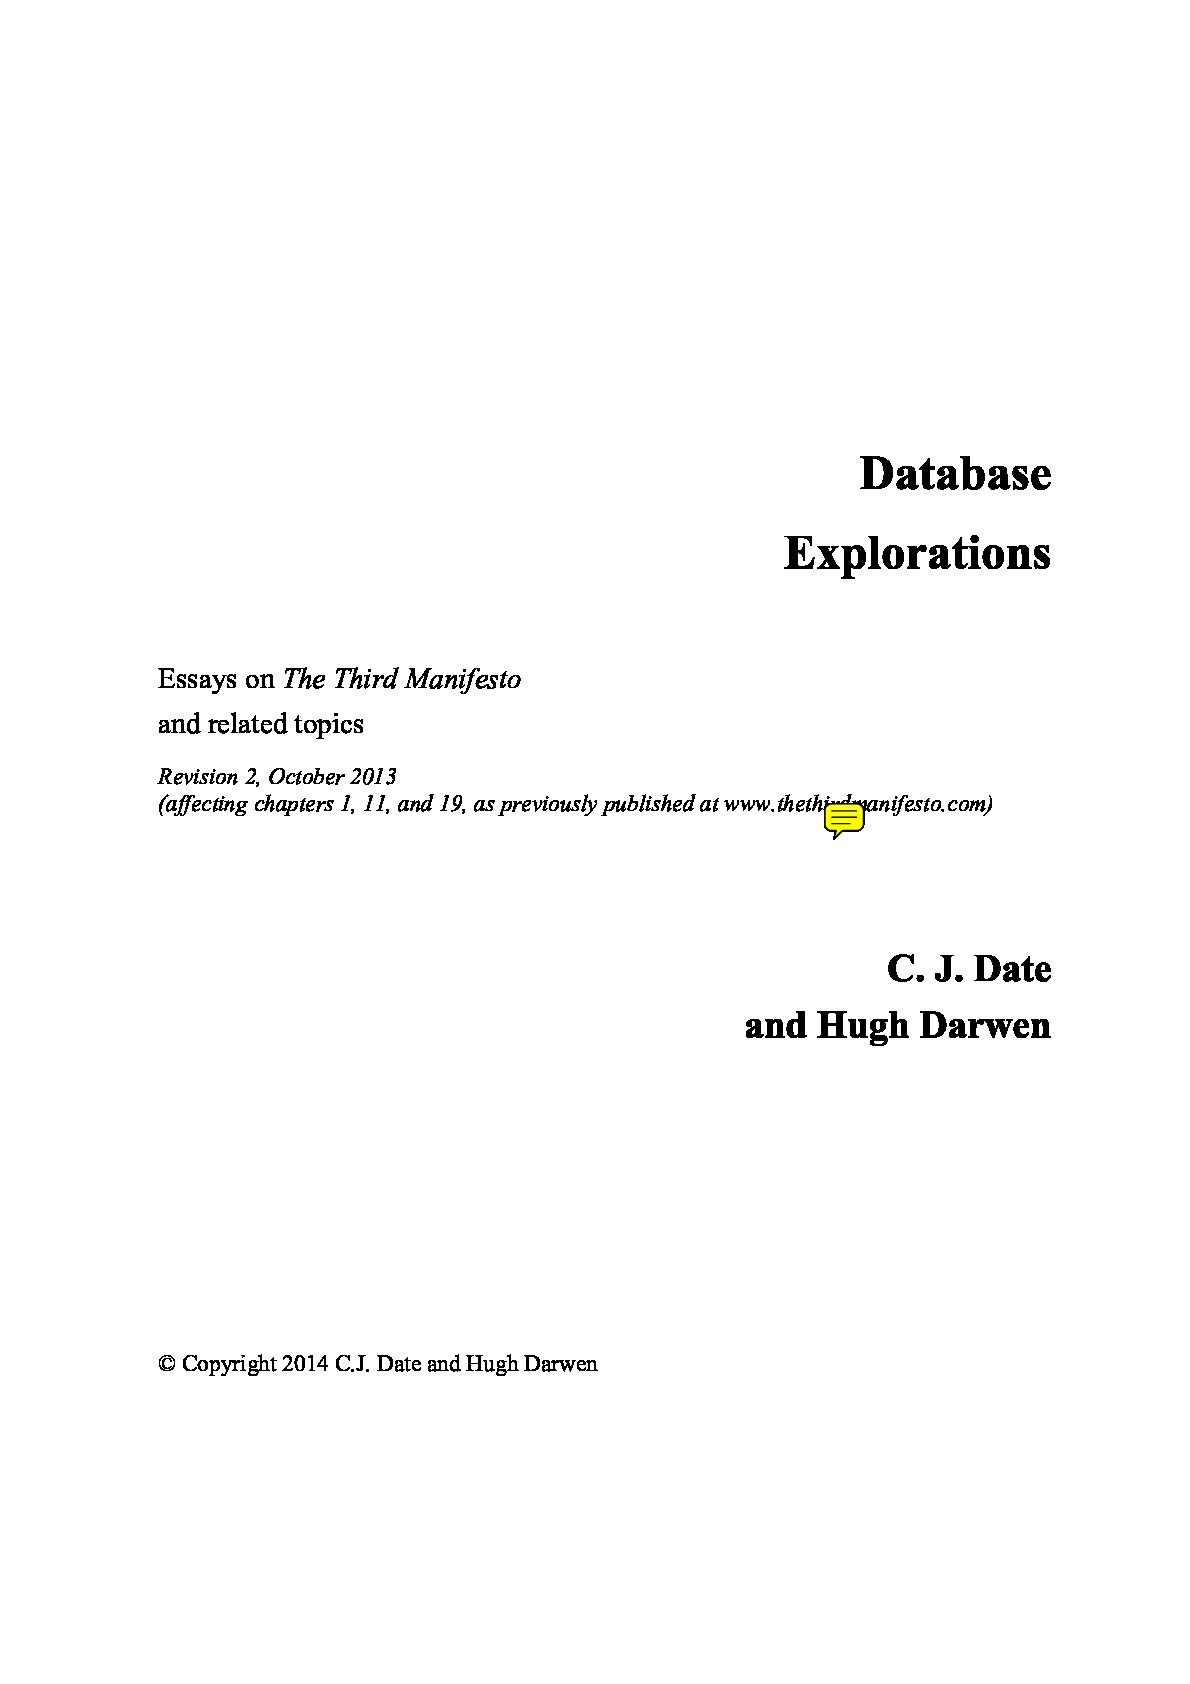 Database-Explorations-revision-2